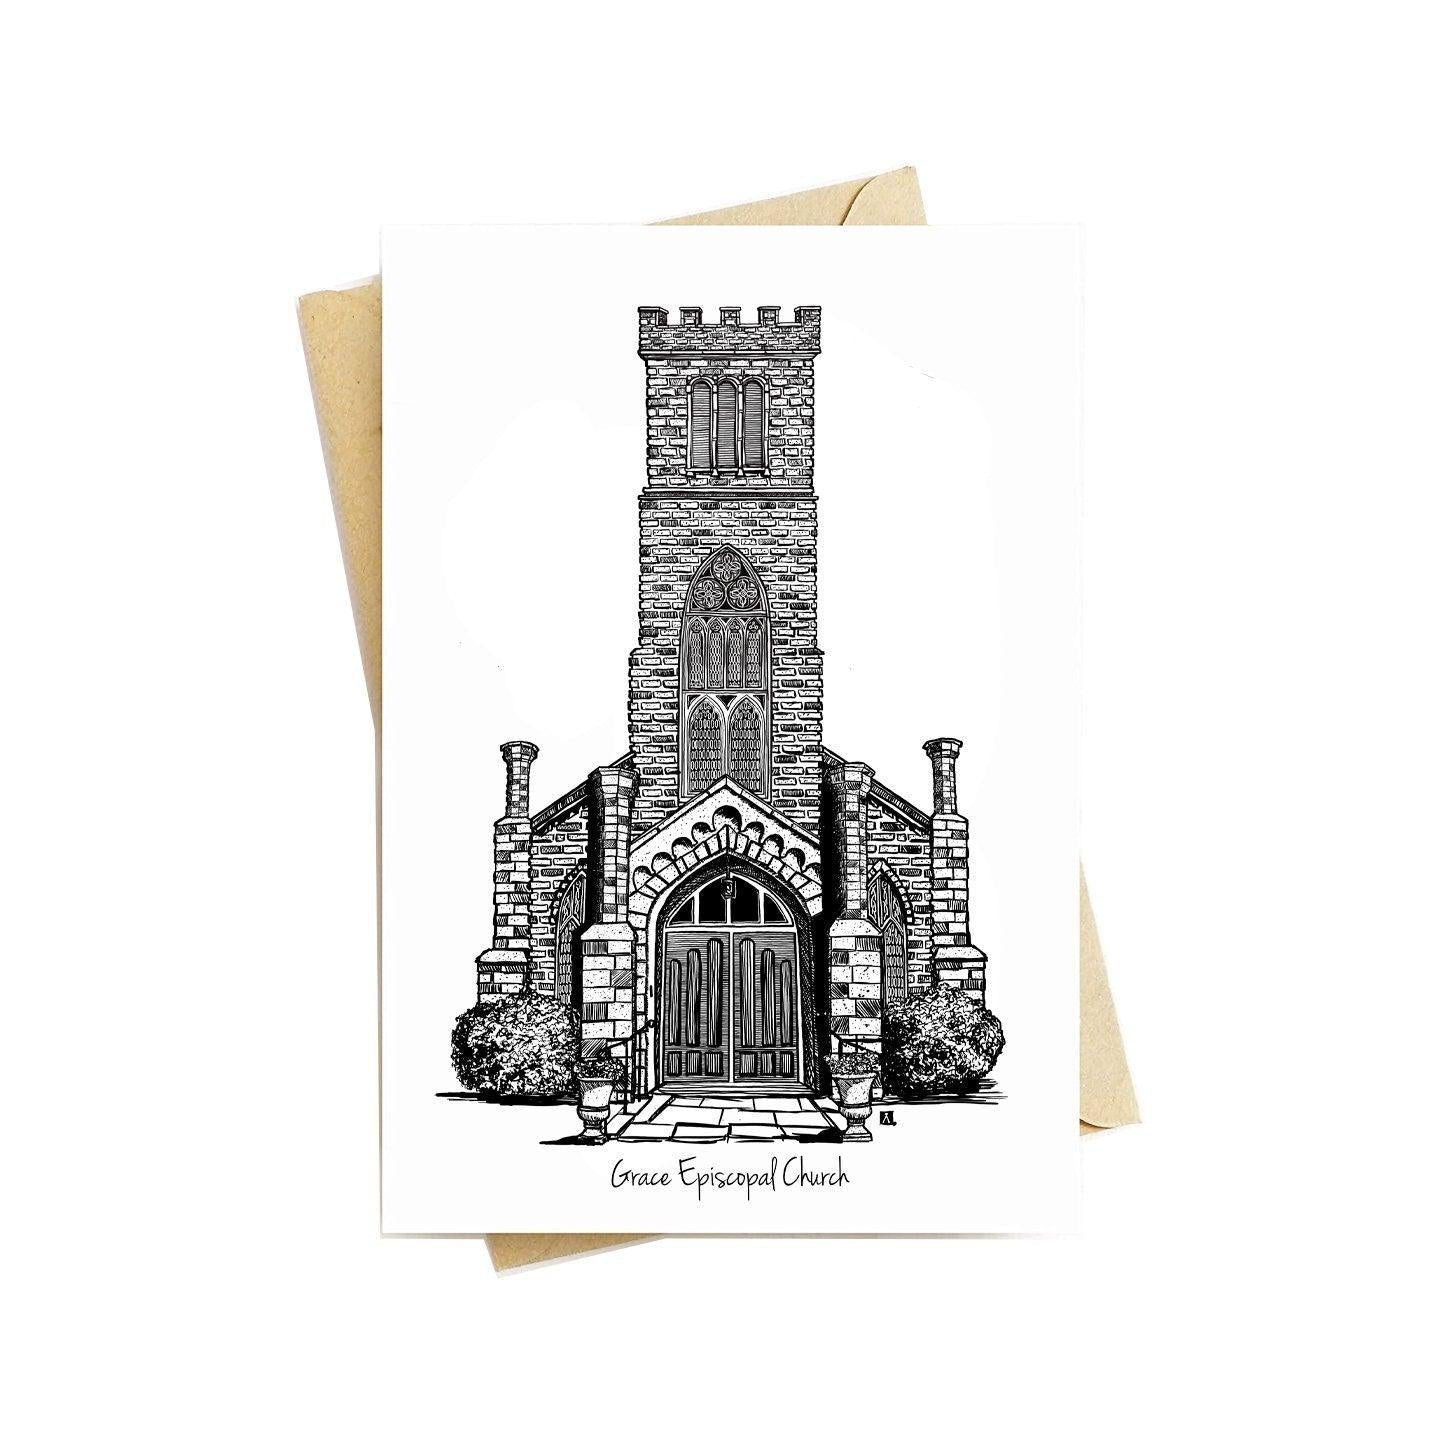 BellavanceInk: Greeting Card With A Pen & Ink Drawing Of Grace Episcopal Church In Keswick, Virginia   5 x 7 Inches - BellavanceInk